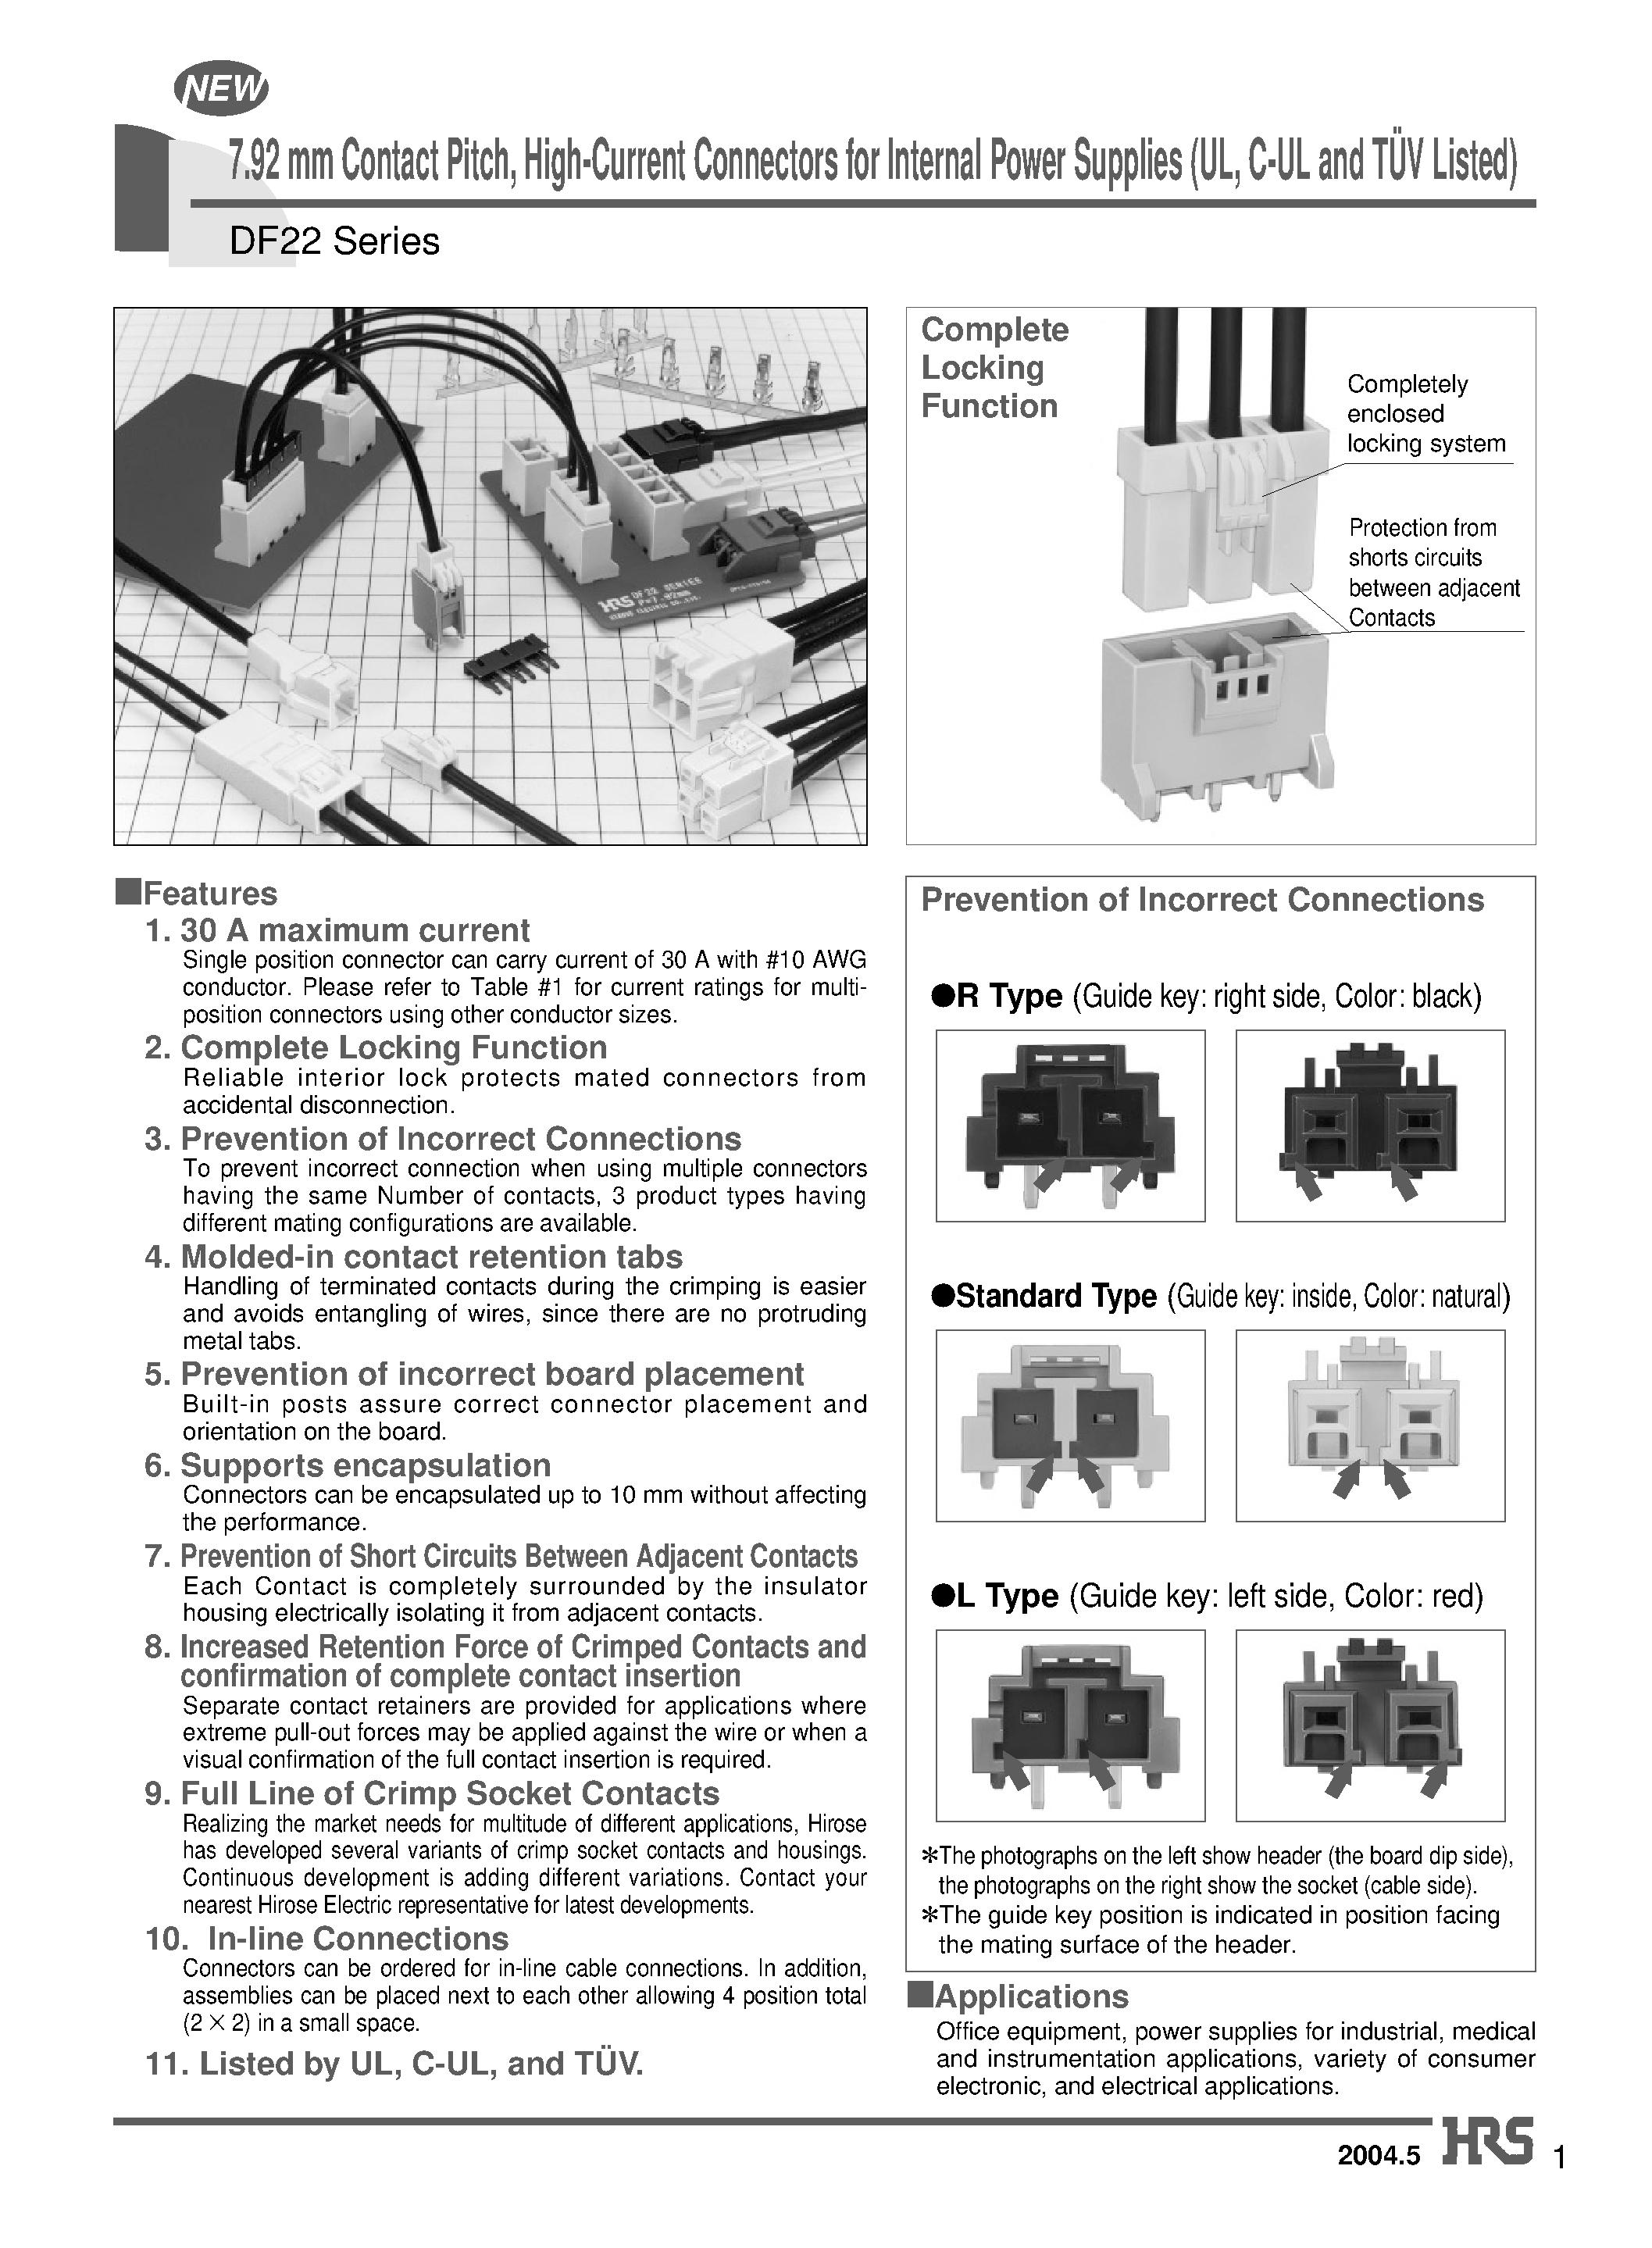 Datasheet DF22A-4DEP-7.92DSA - 7.92 mm Contact Pitch/ High-Current Connectors for Internal Power Supplies (UL/ C-UL and TUV Listed) page 1